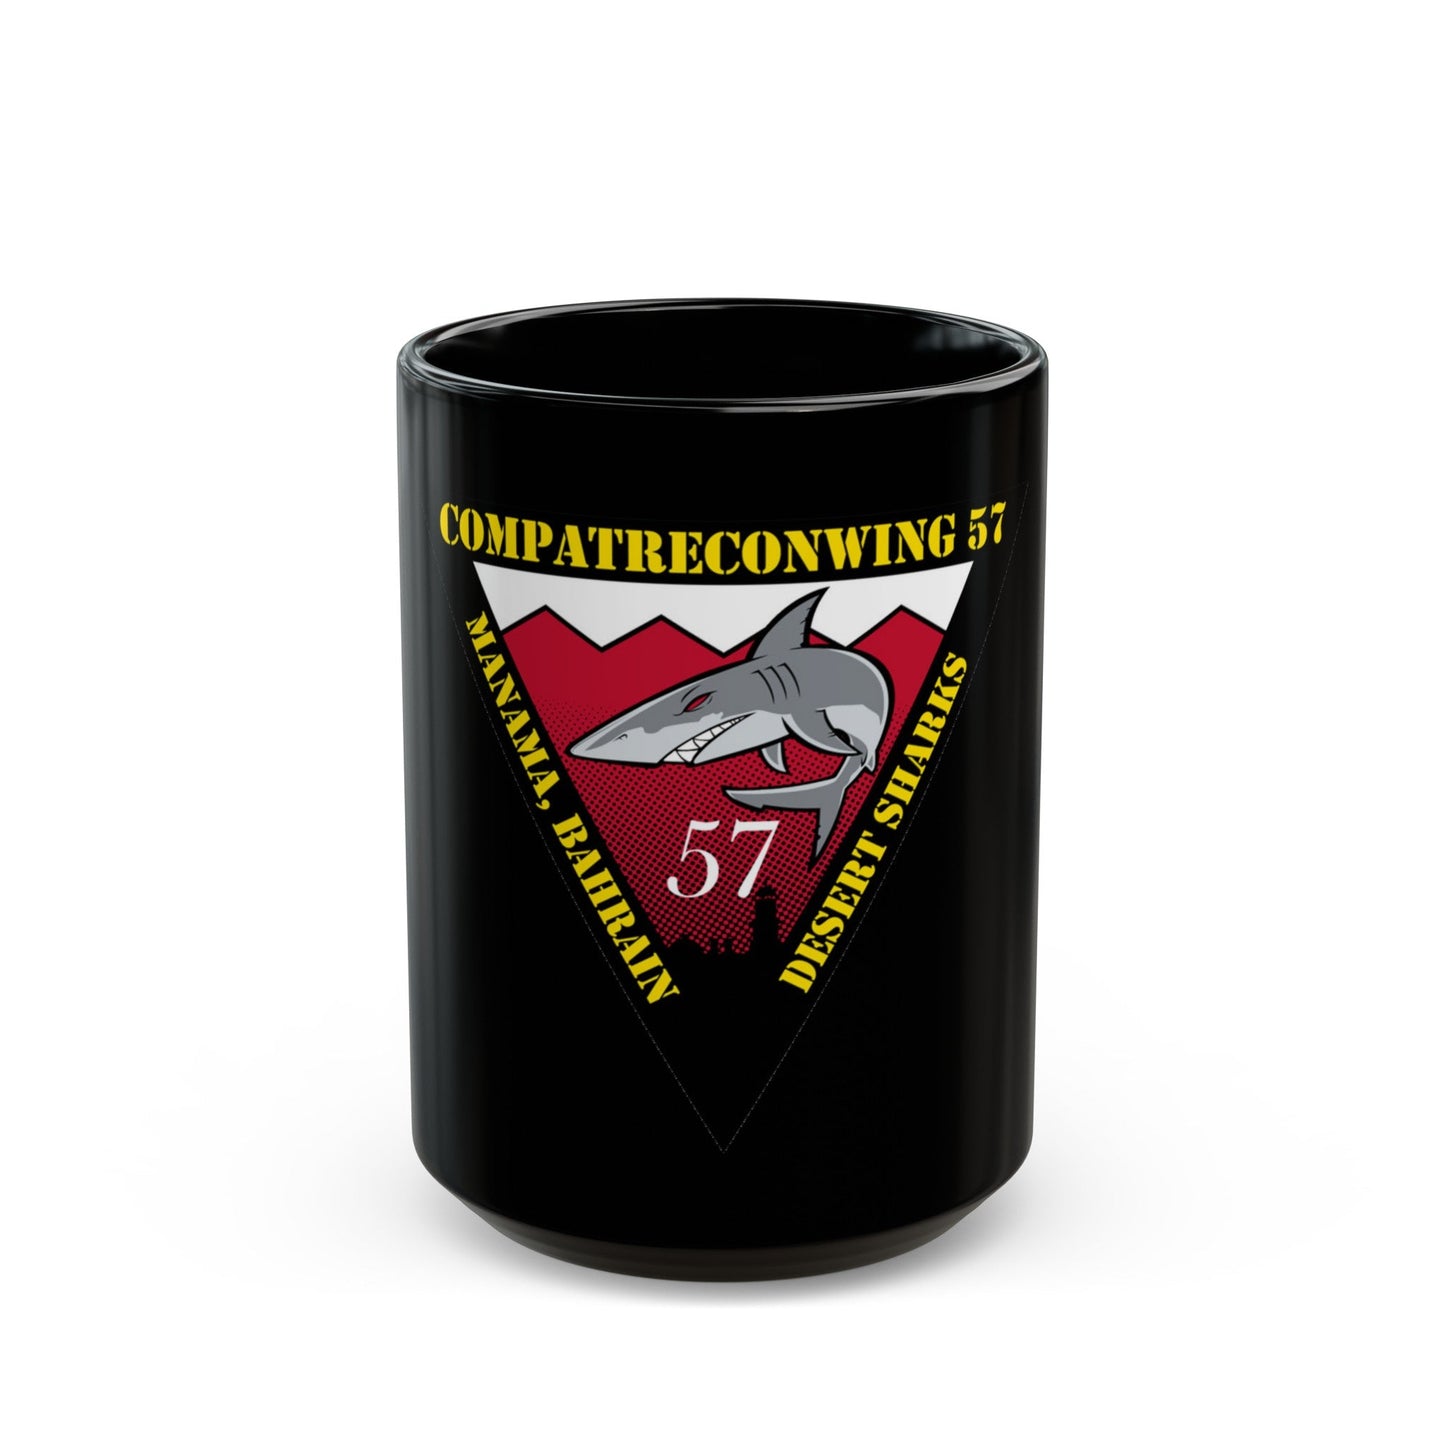 COMPATRECONWING 57 Commander Patrol and Reconnaissance Wing 57 (U.S. Navy) Black Coffee Mug-15oz-The Sticker Space